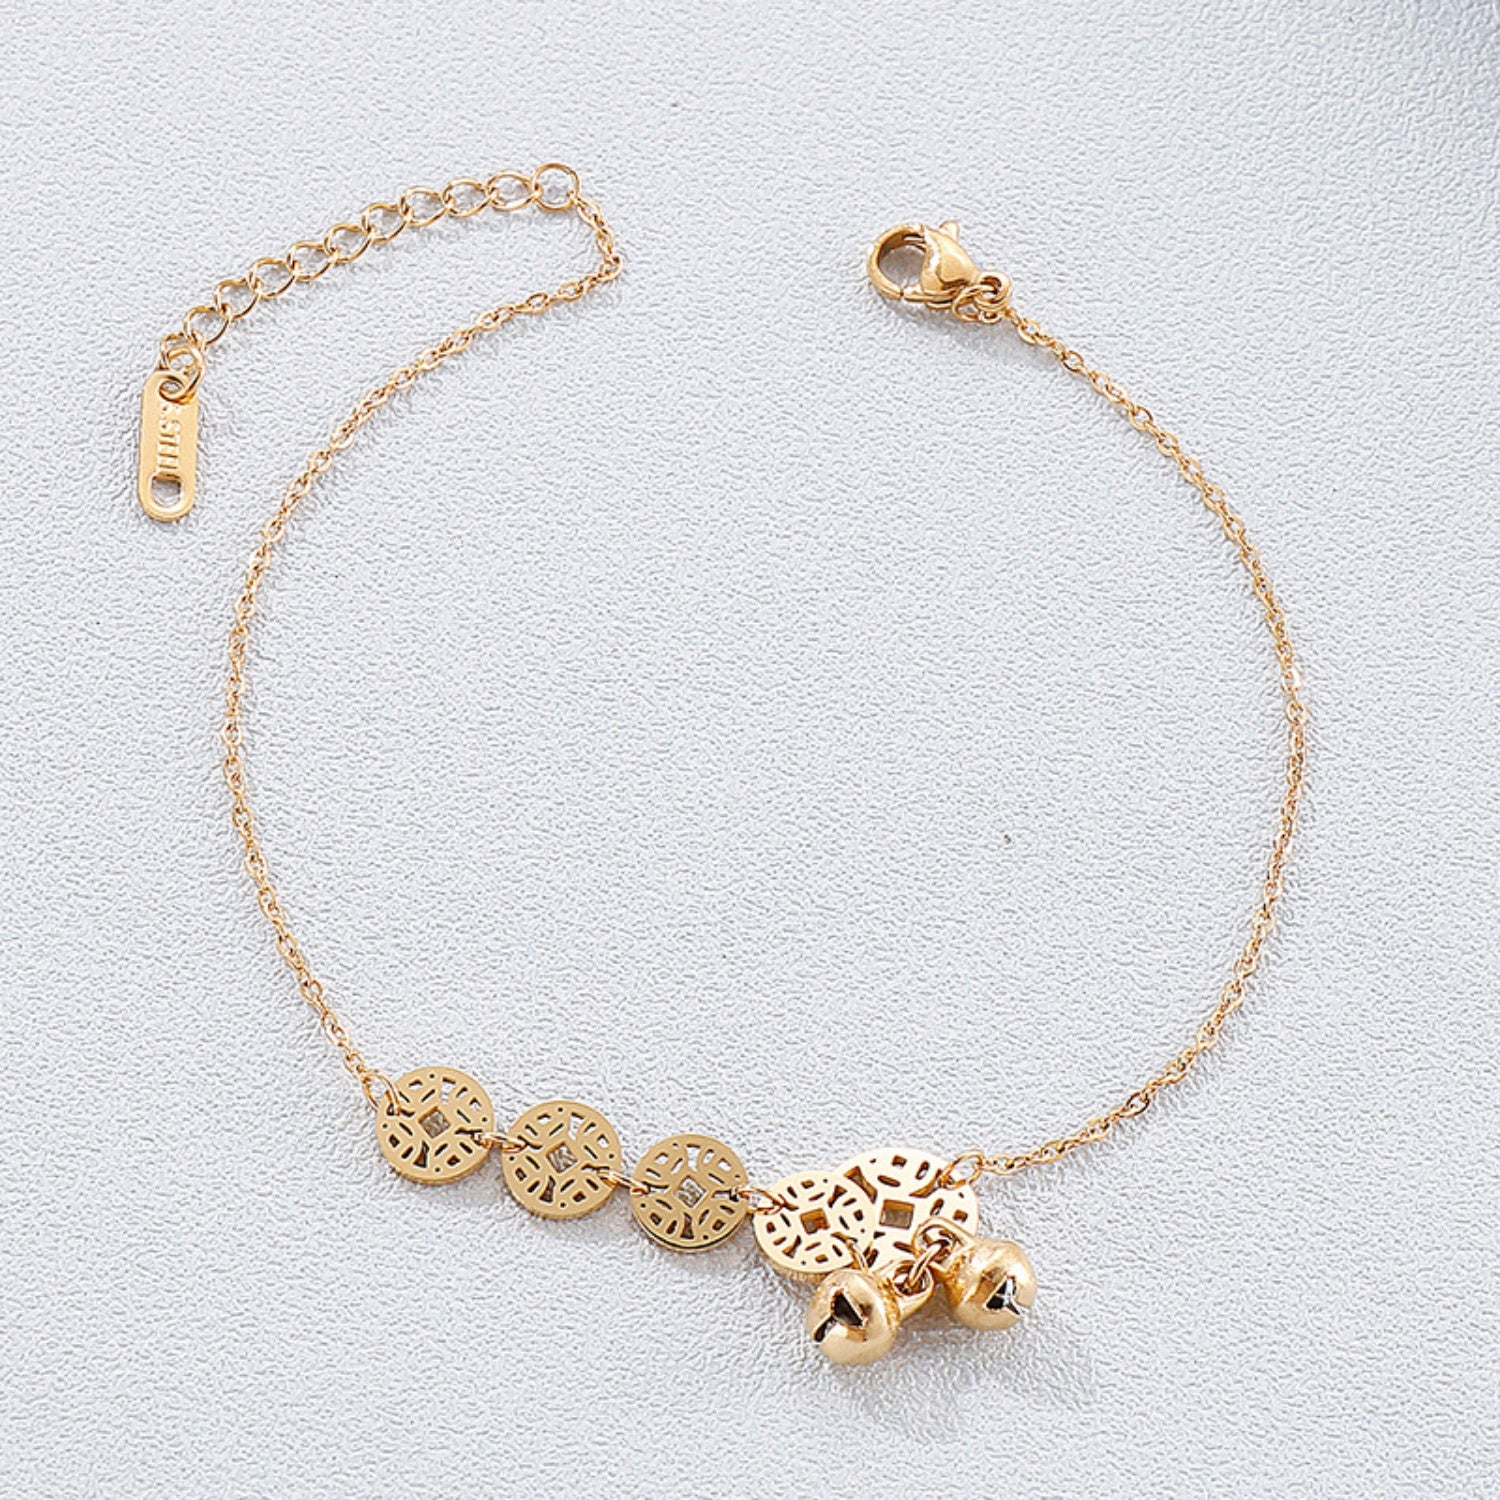 Stainless Steel Coin Shape Anklet Bracelet Gold One Size